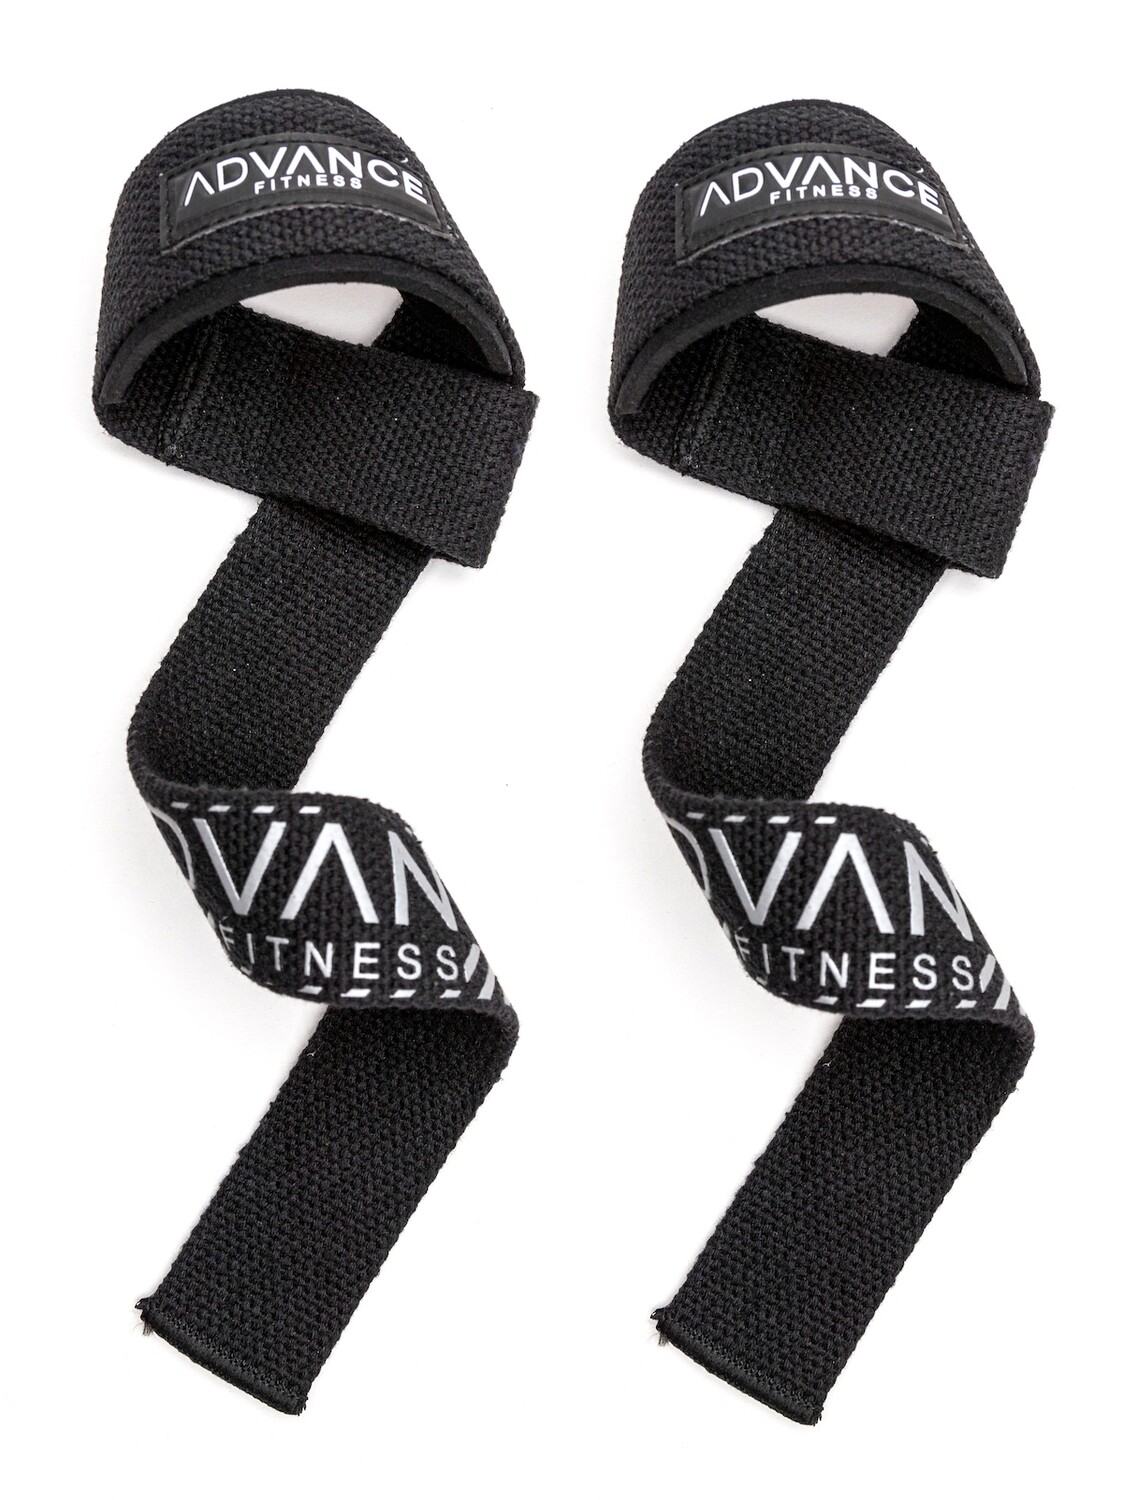 LIFTING STRAPS - NEW!!